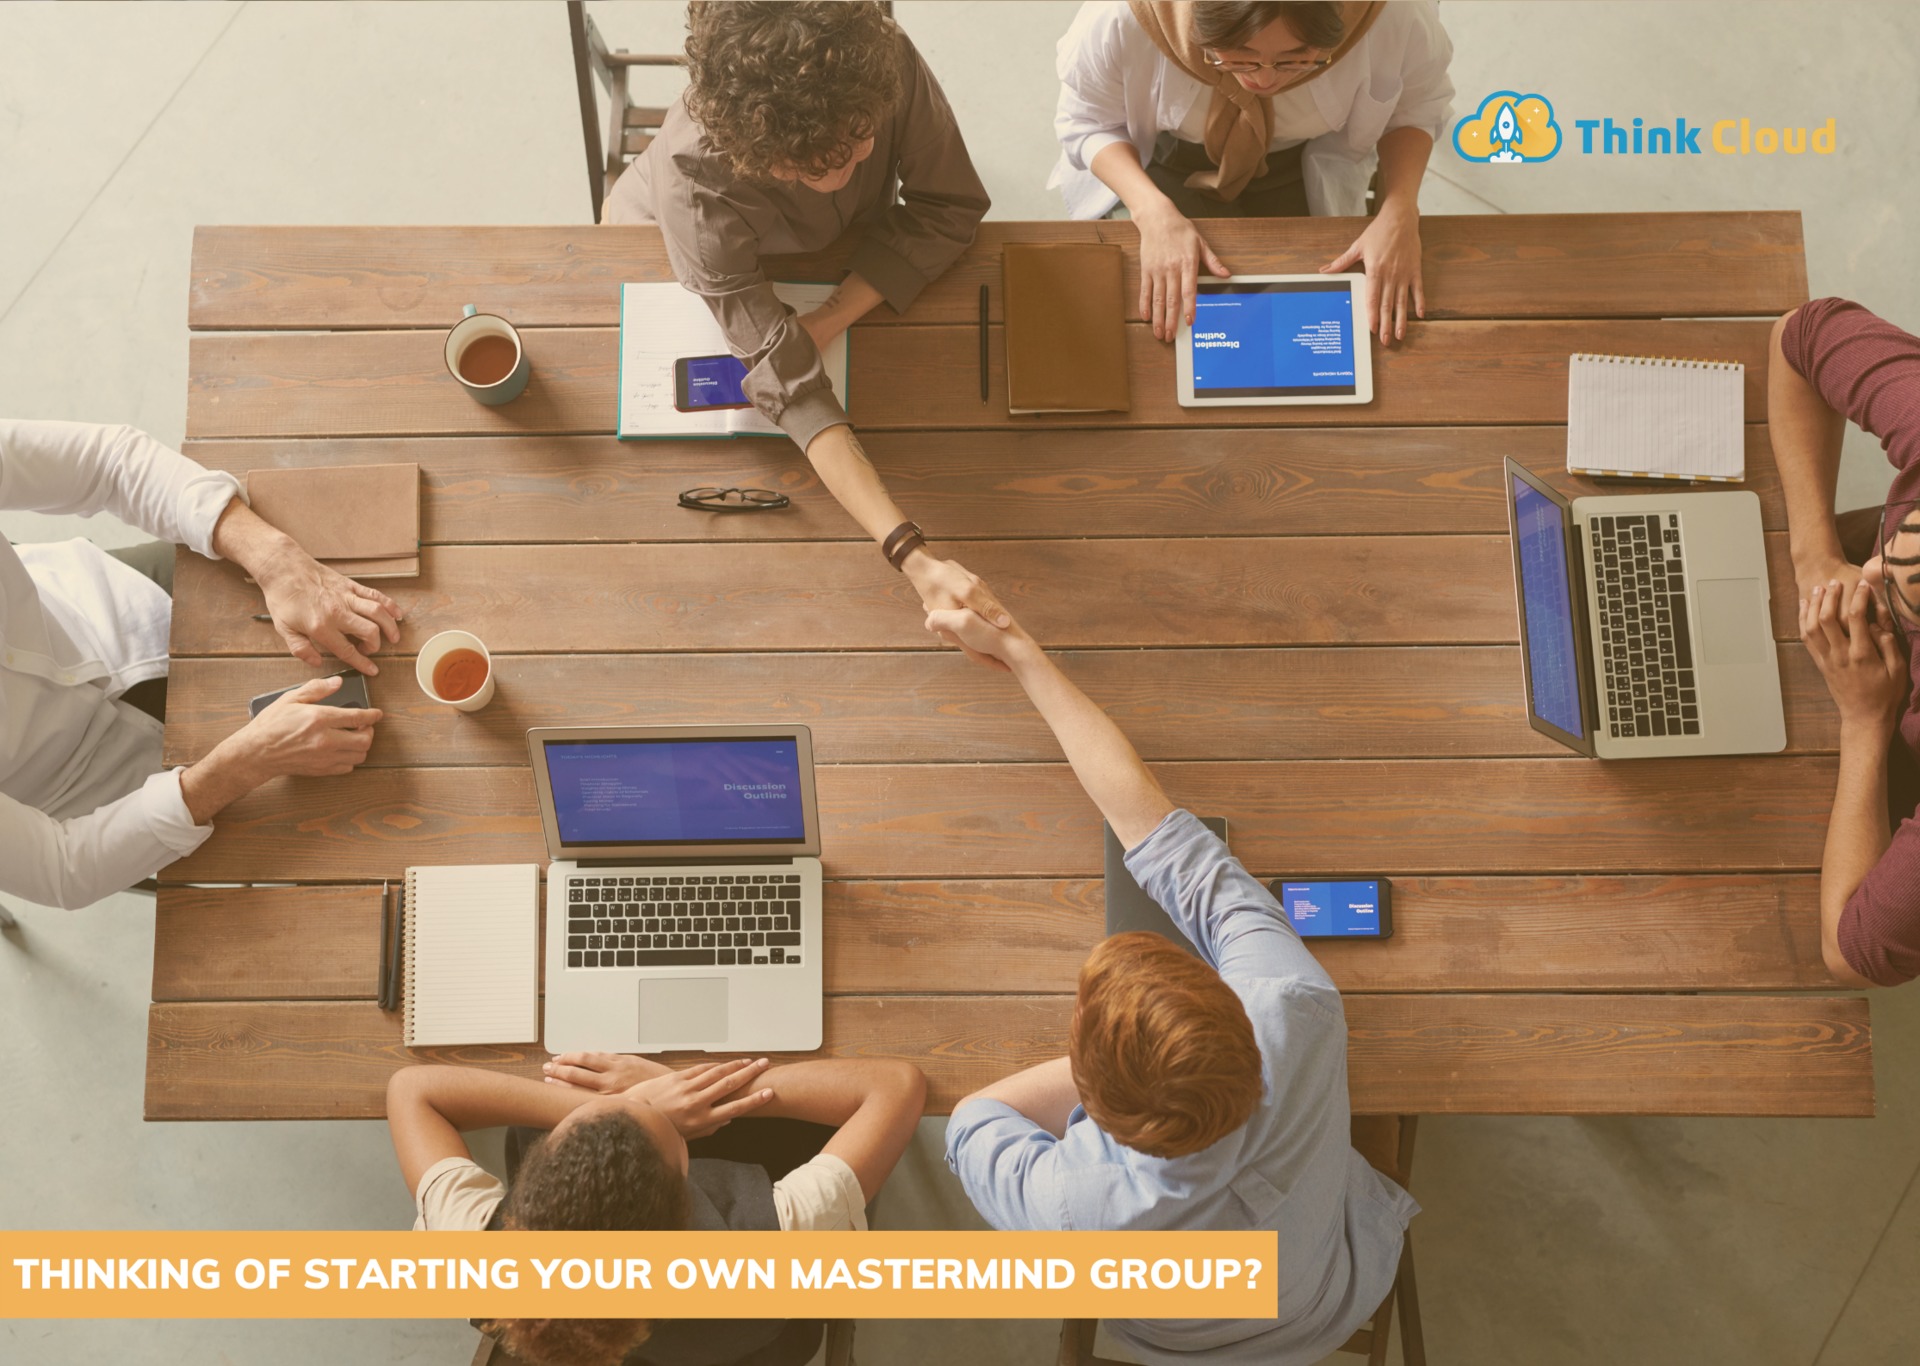 Thinking of starting your own mastermind group?